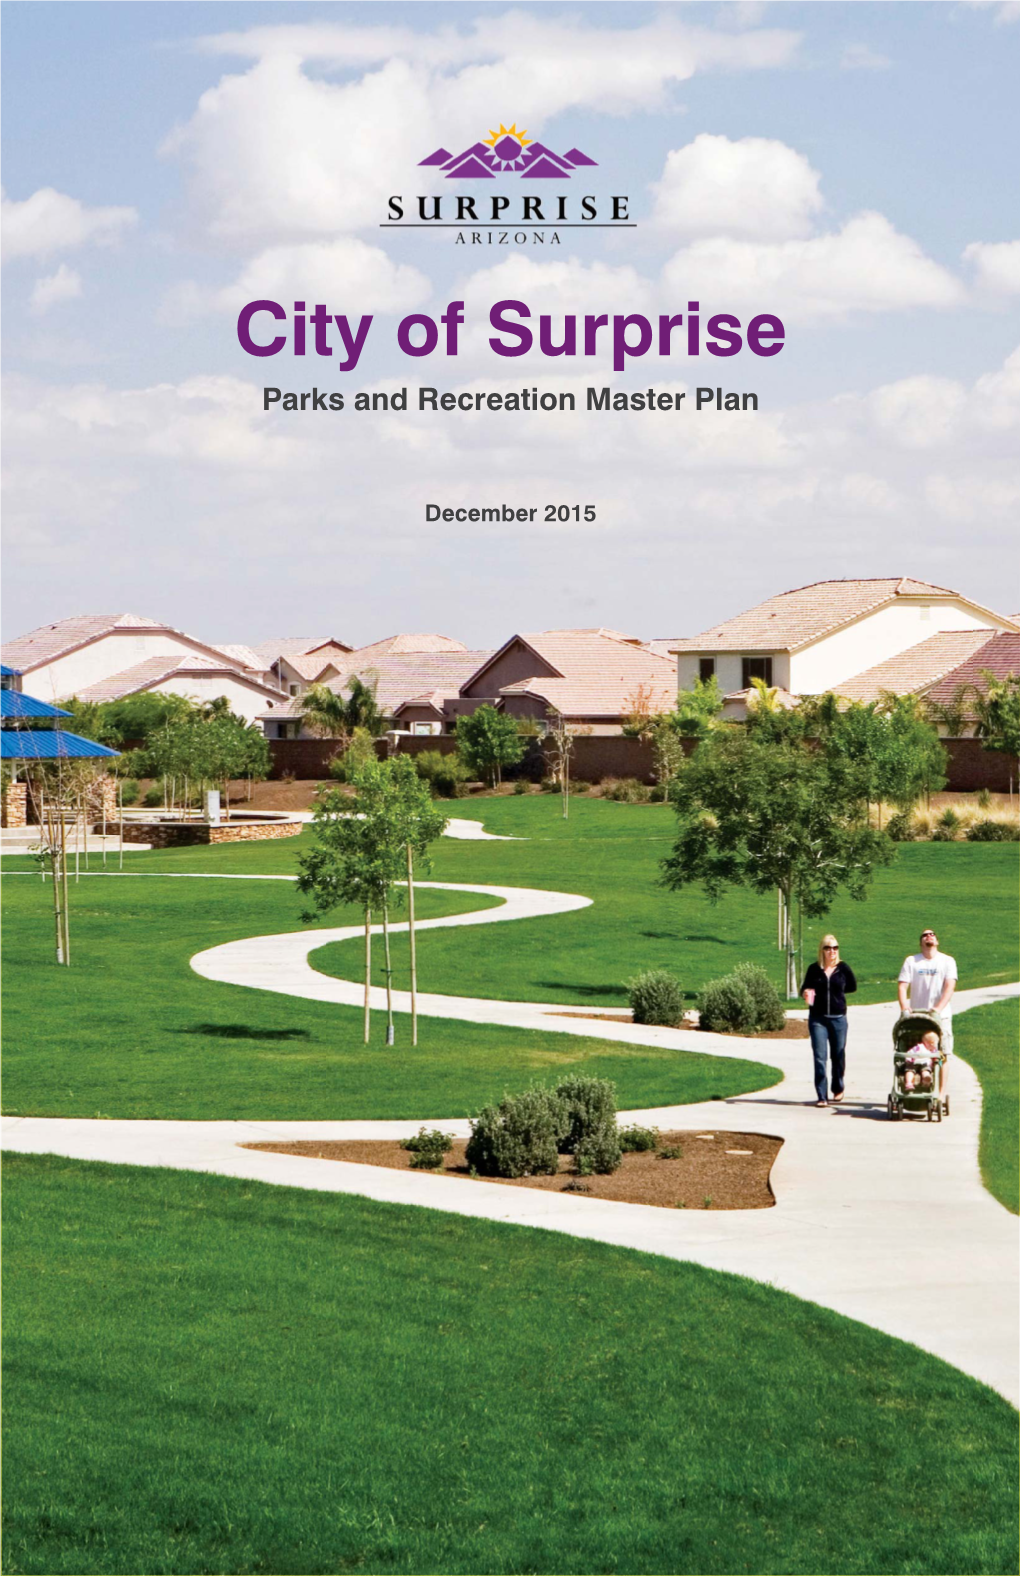 City of Surprise Parks and Recreation Master Plan